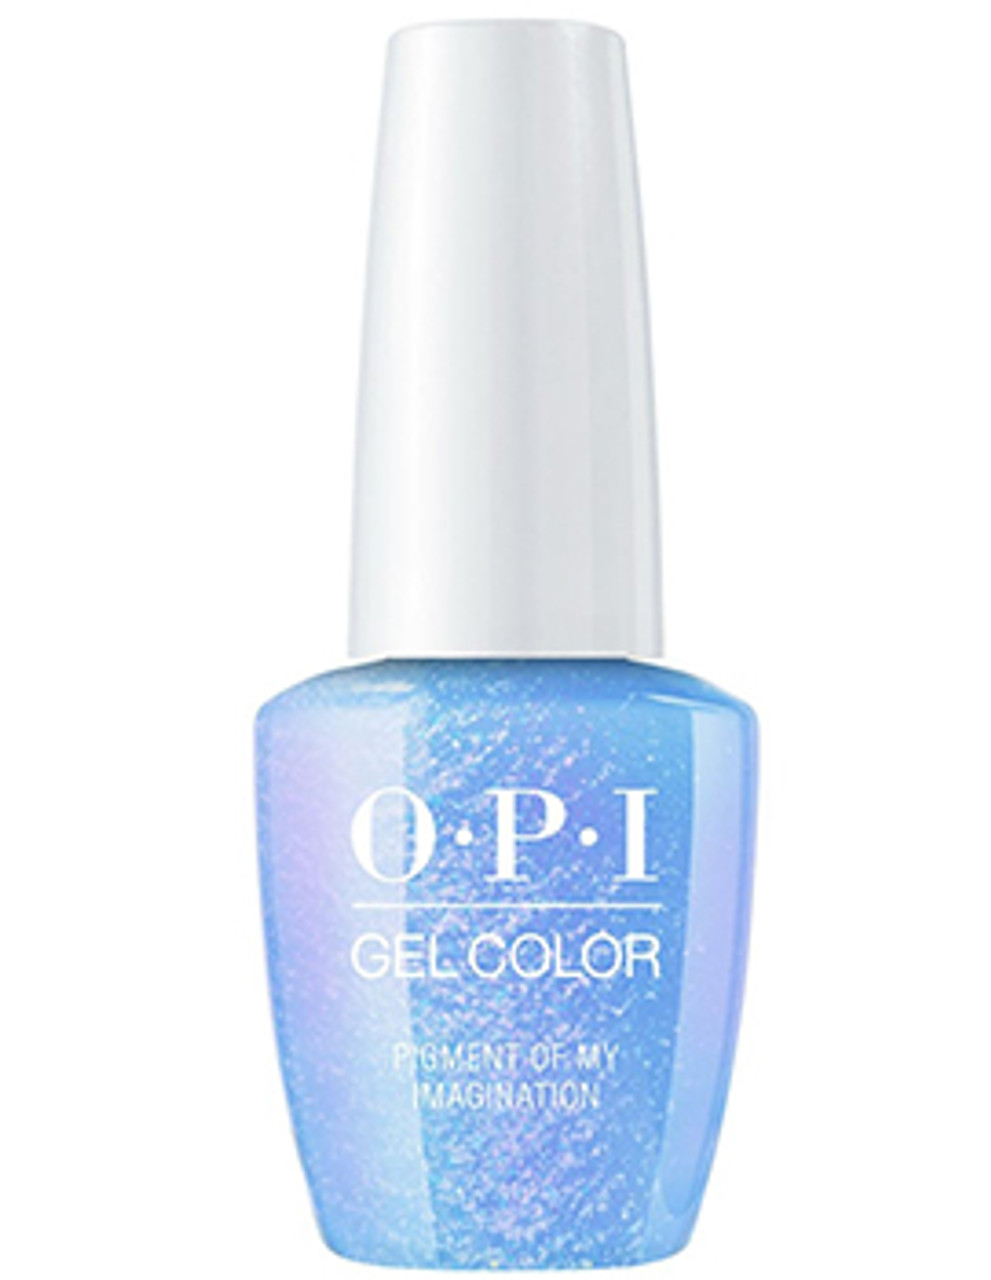 OPI GelColor Pigment of My Imagination - .5 Oz / 15 mL